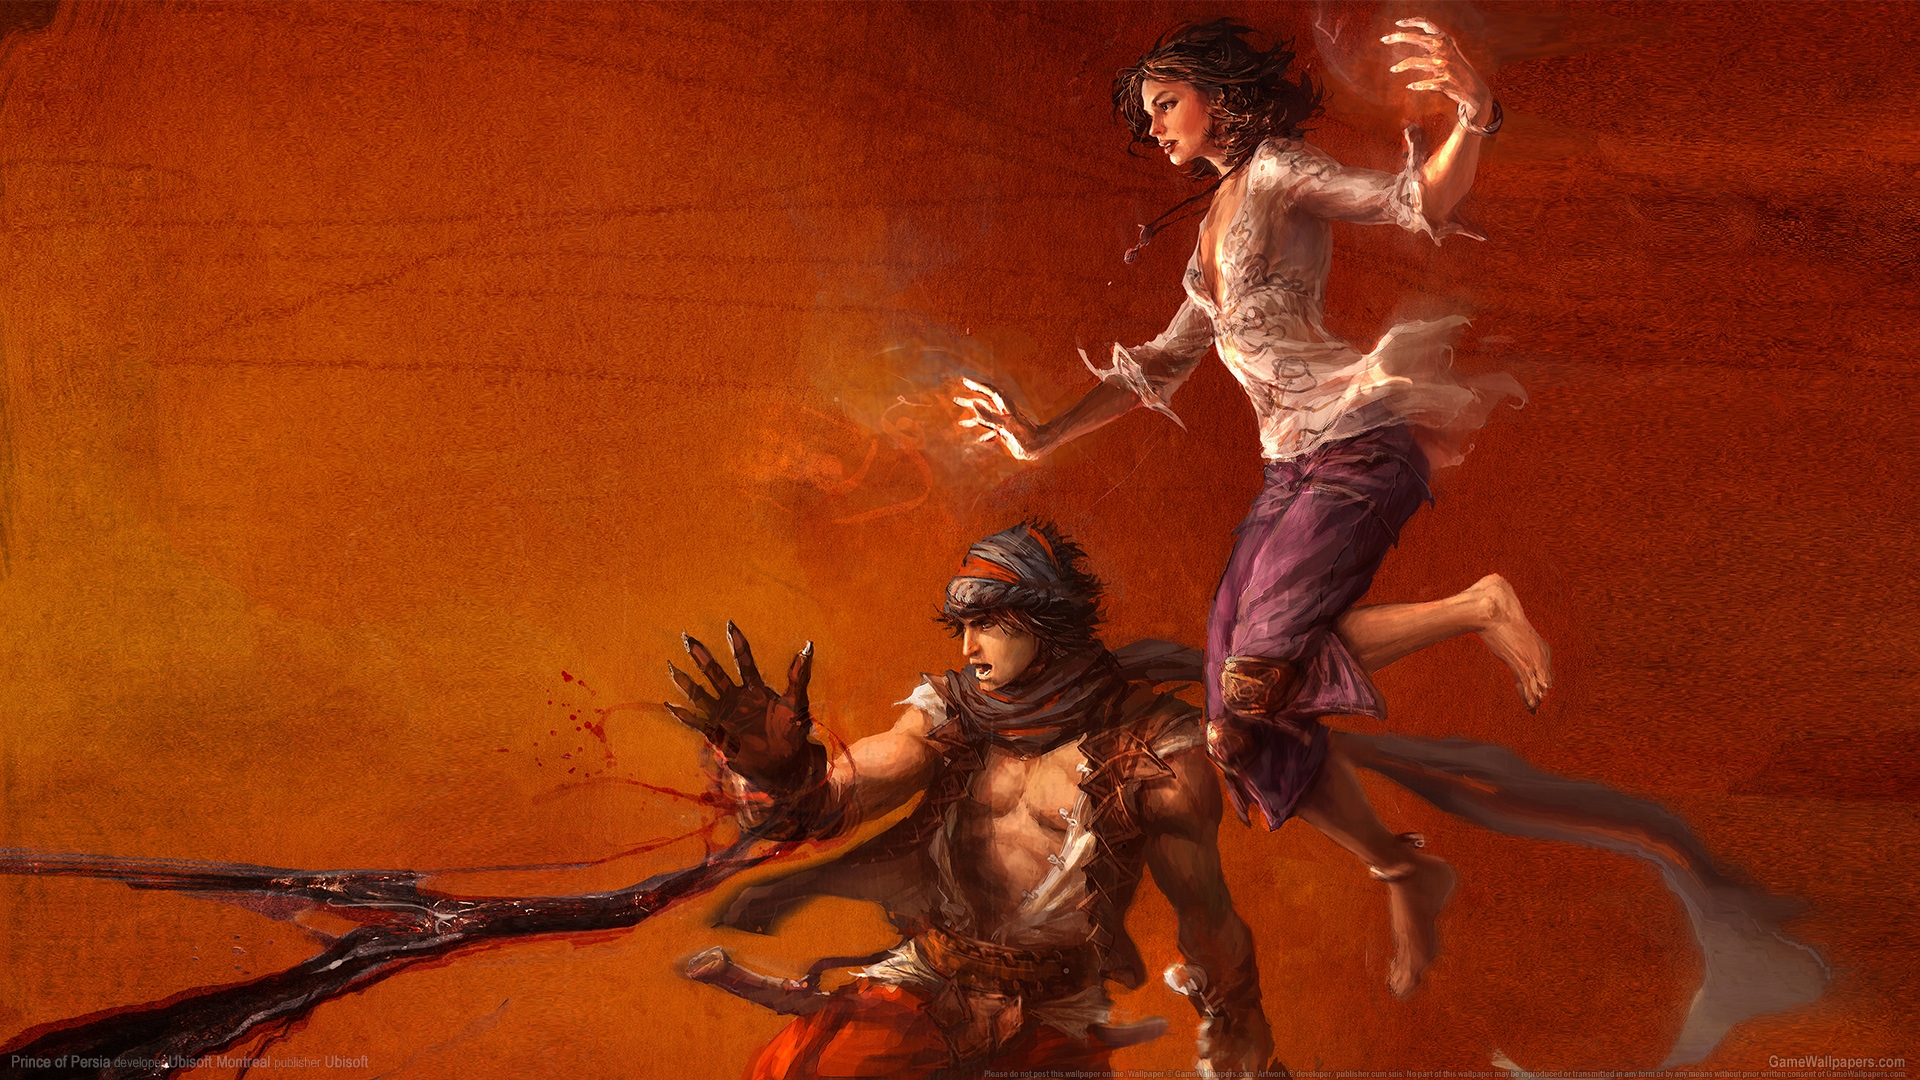 Prince of Persia 1920x1080 wallpaper or background 07